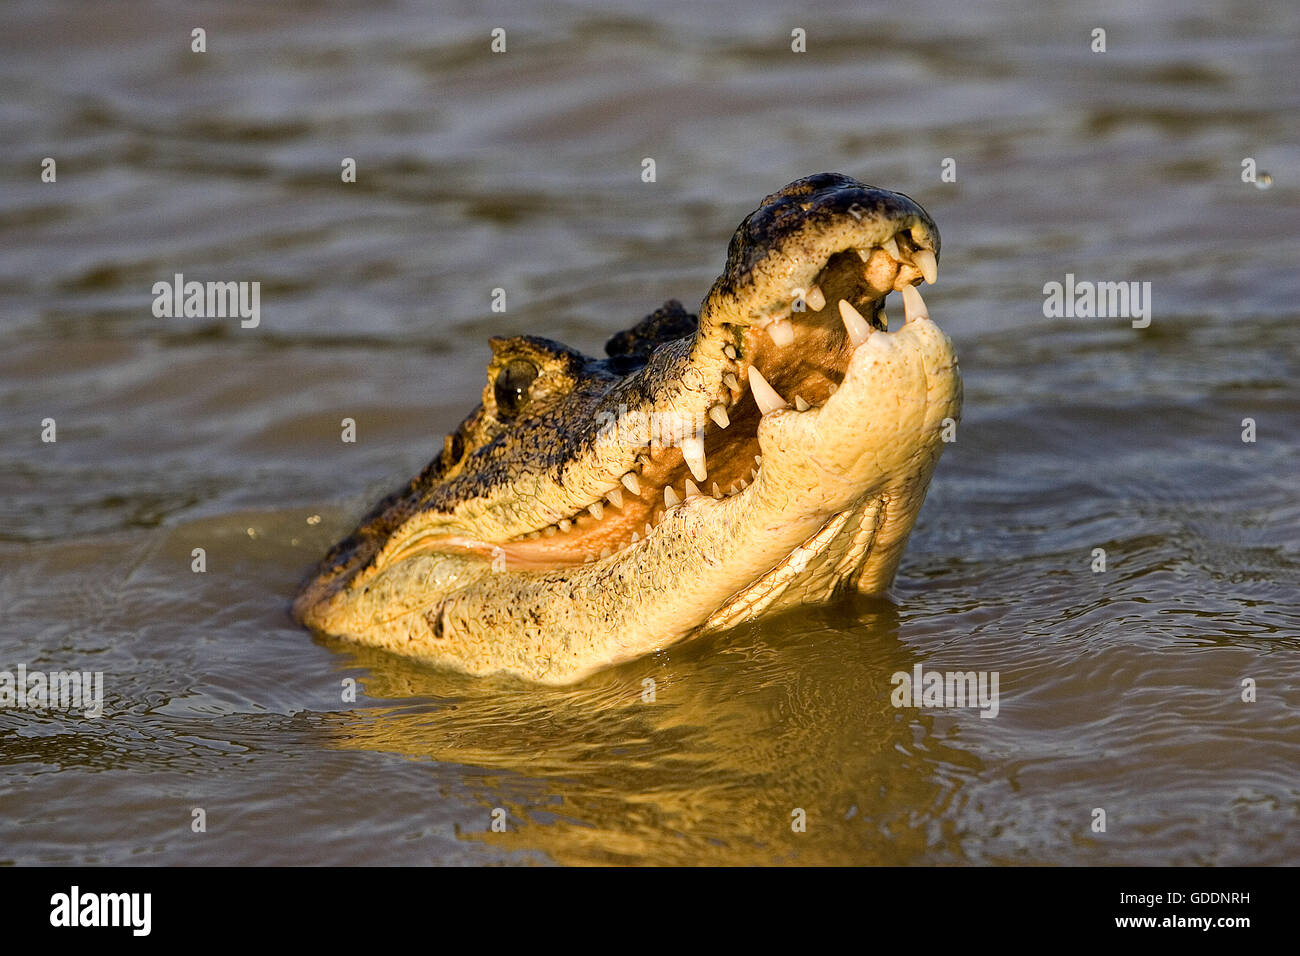 Spectacled Caiman, caiman crocodilus, Adult with Open Mouth, Los Lianos in Venezuela Stock Photo